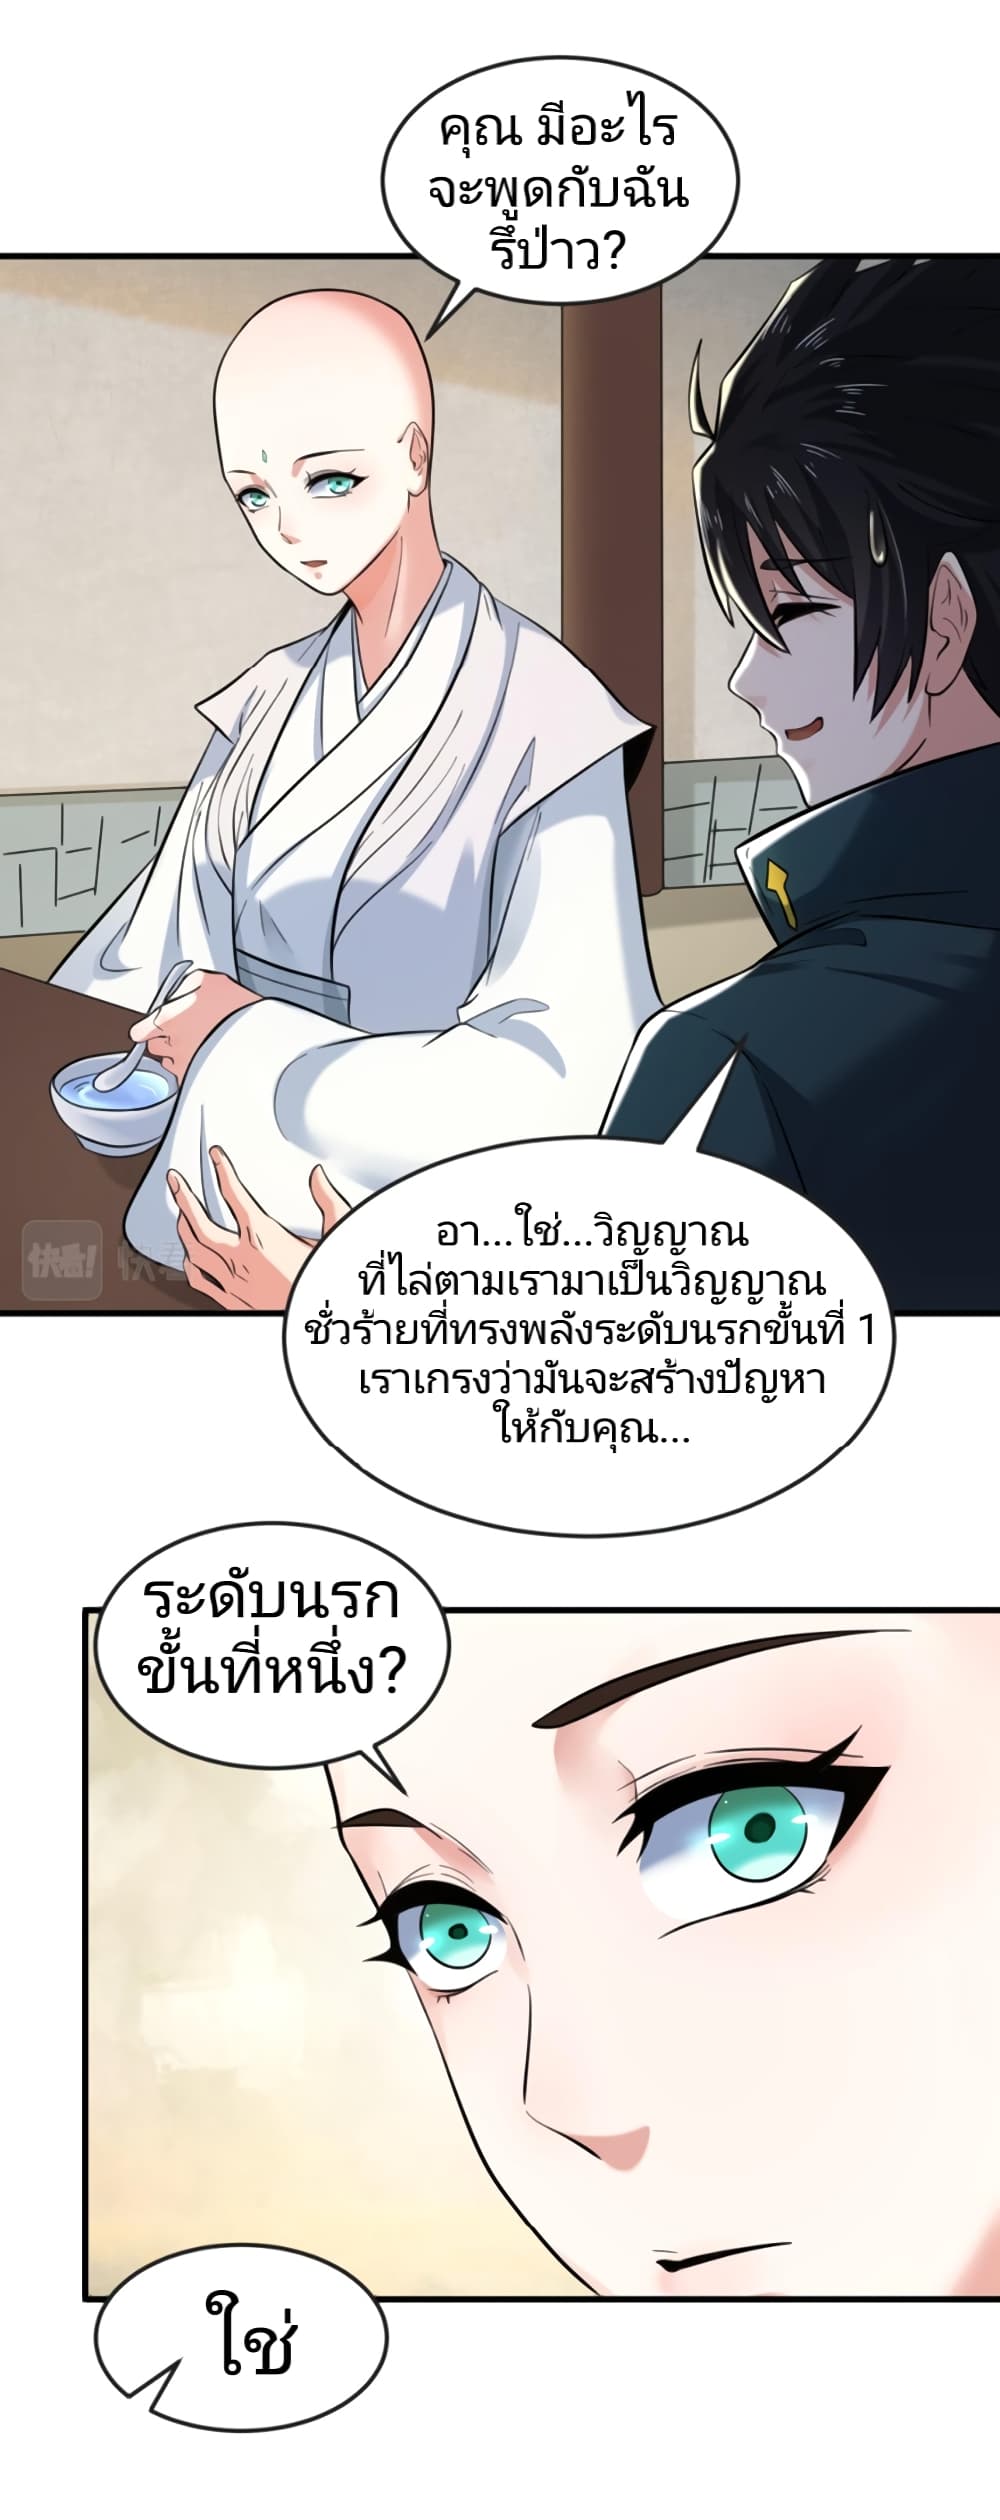 The Age of Ghost Spirits à¸à¸­à¸à¸à¸µà¹ 44 (30)